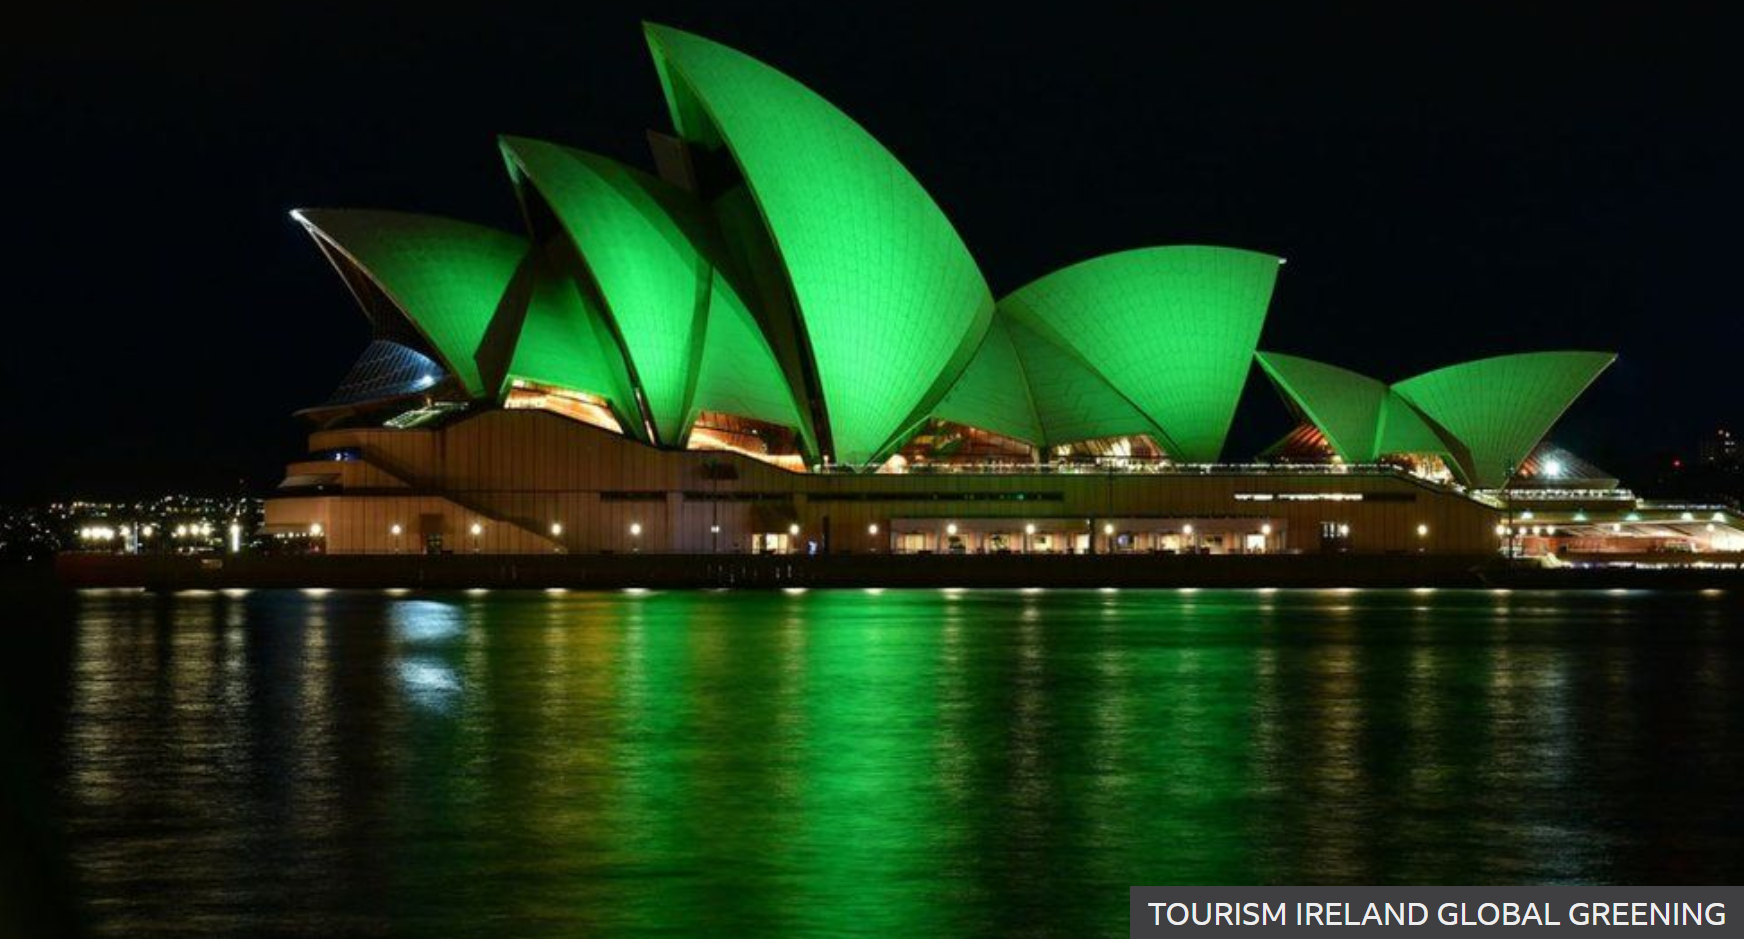 Sydney Opera House was one of the first landmarks to take part in the Global Greetings initiative.